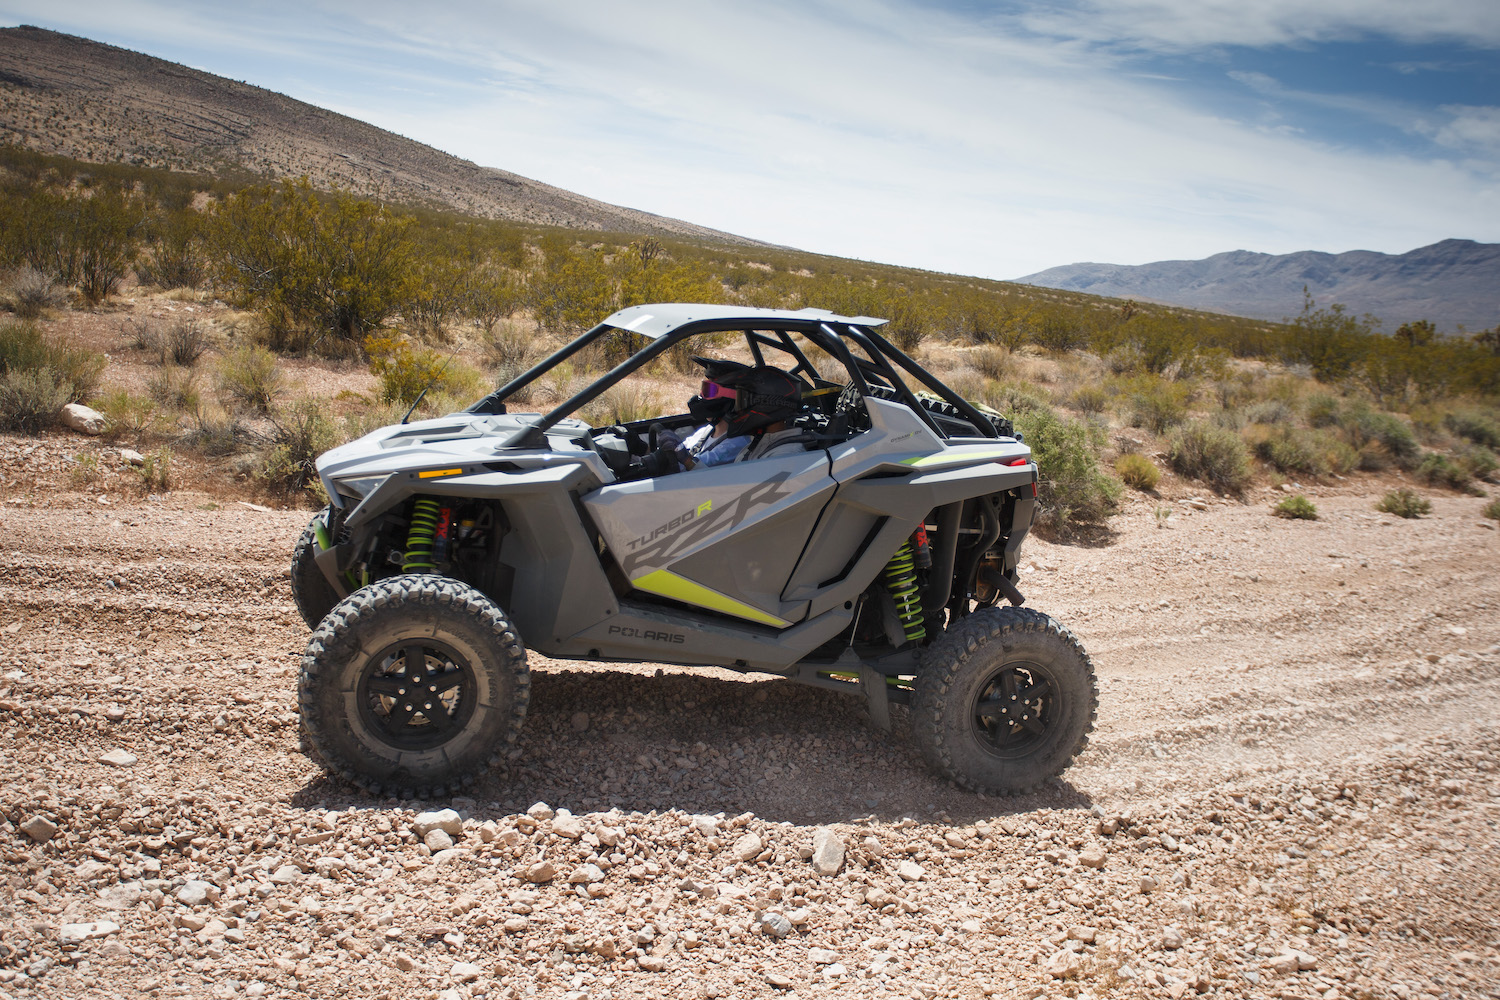 Polaris RZR Turbo R from the side on a dirt trail in the desert with bushes in the background.